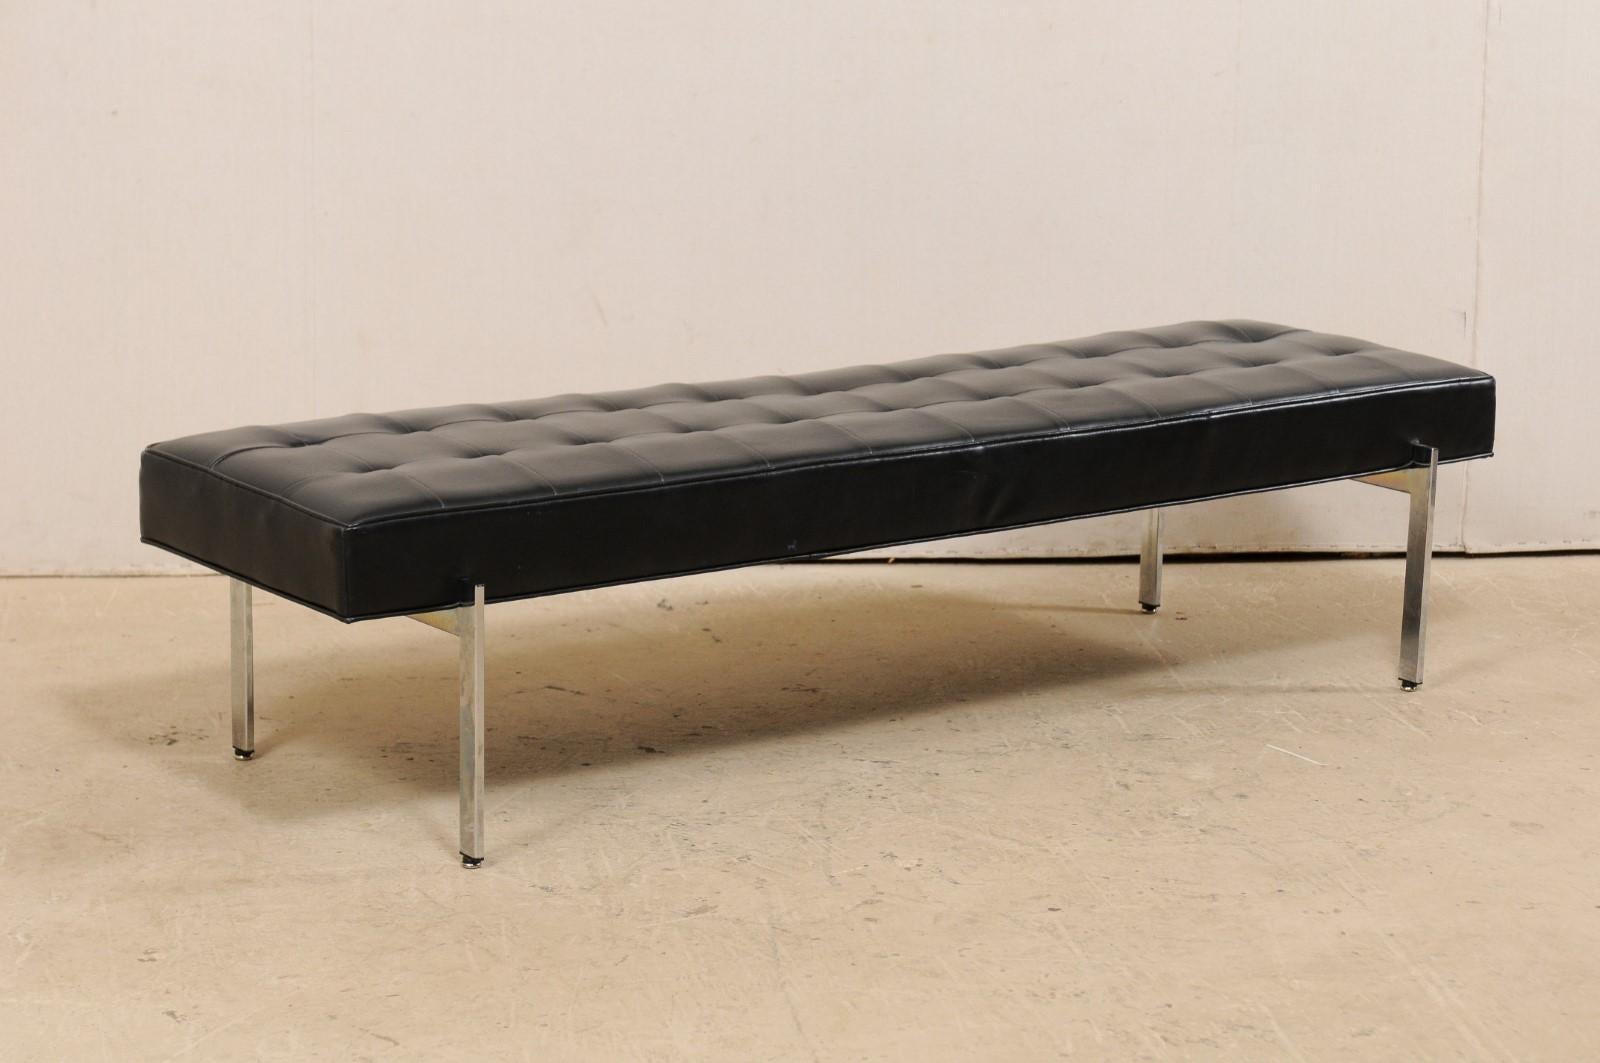 A vintage bench designed by Milo Baughman for The Thayer Coggin Institutional, Inc. (High Point, NC). This backless bench has been designed in very modern, minimal lines; the rectangular-shaped seat is covered in tufted black leather, and is raised